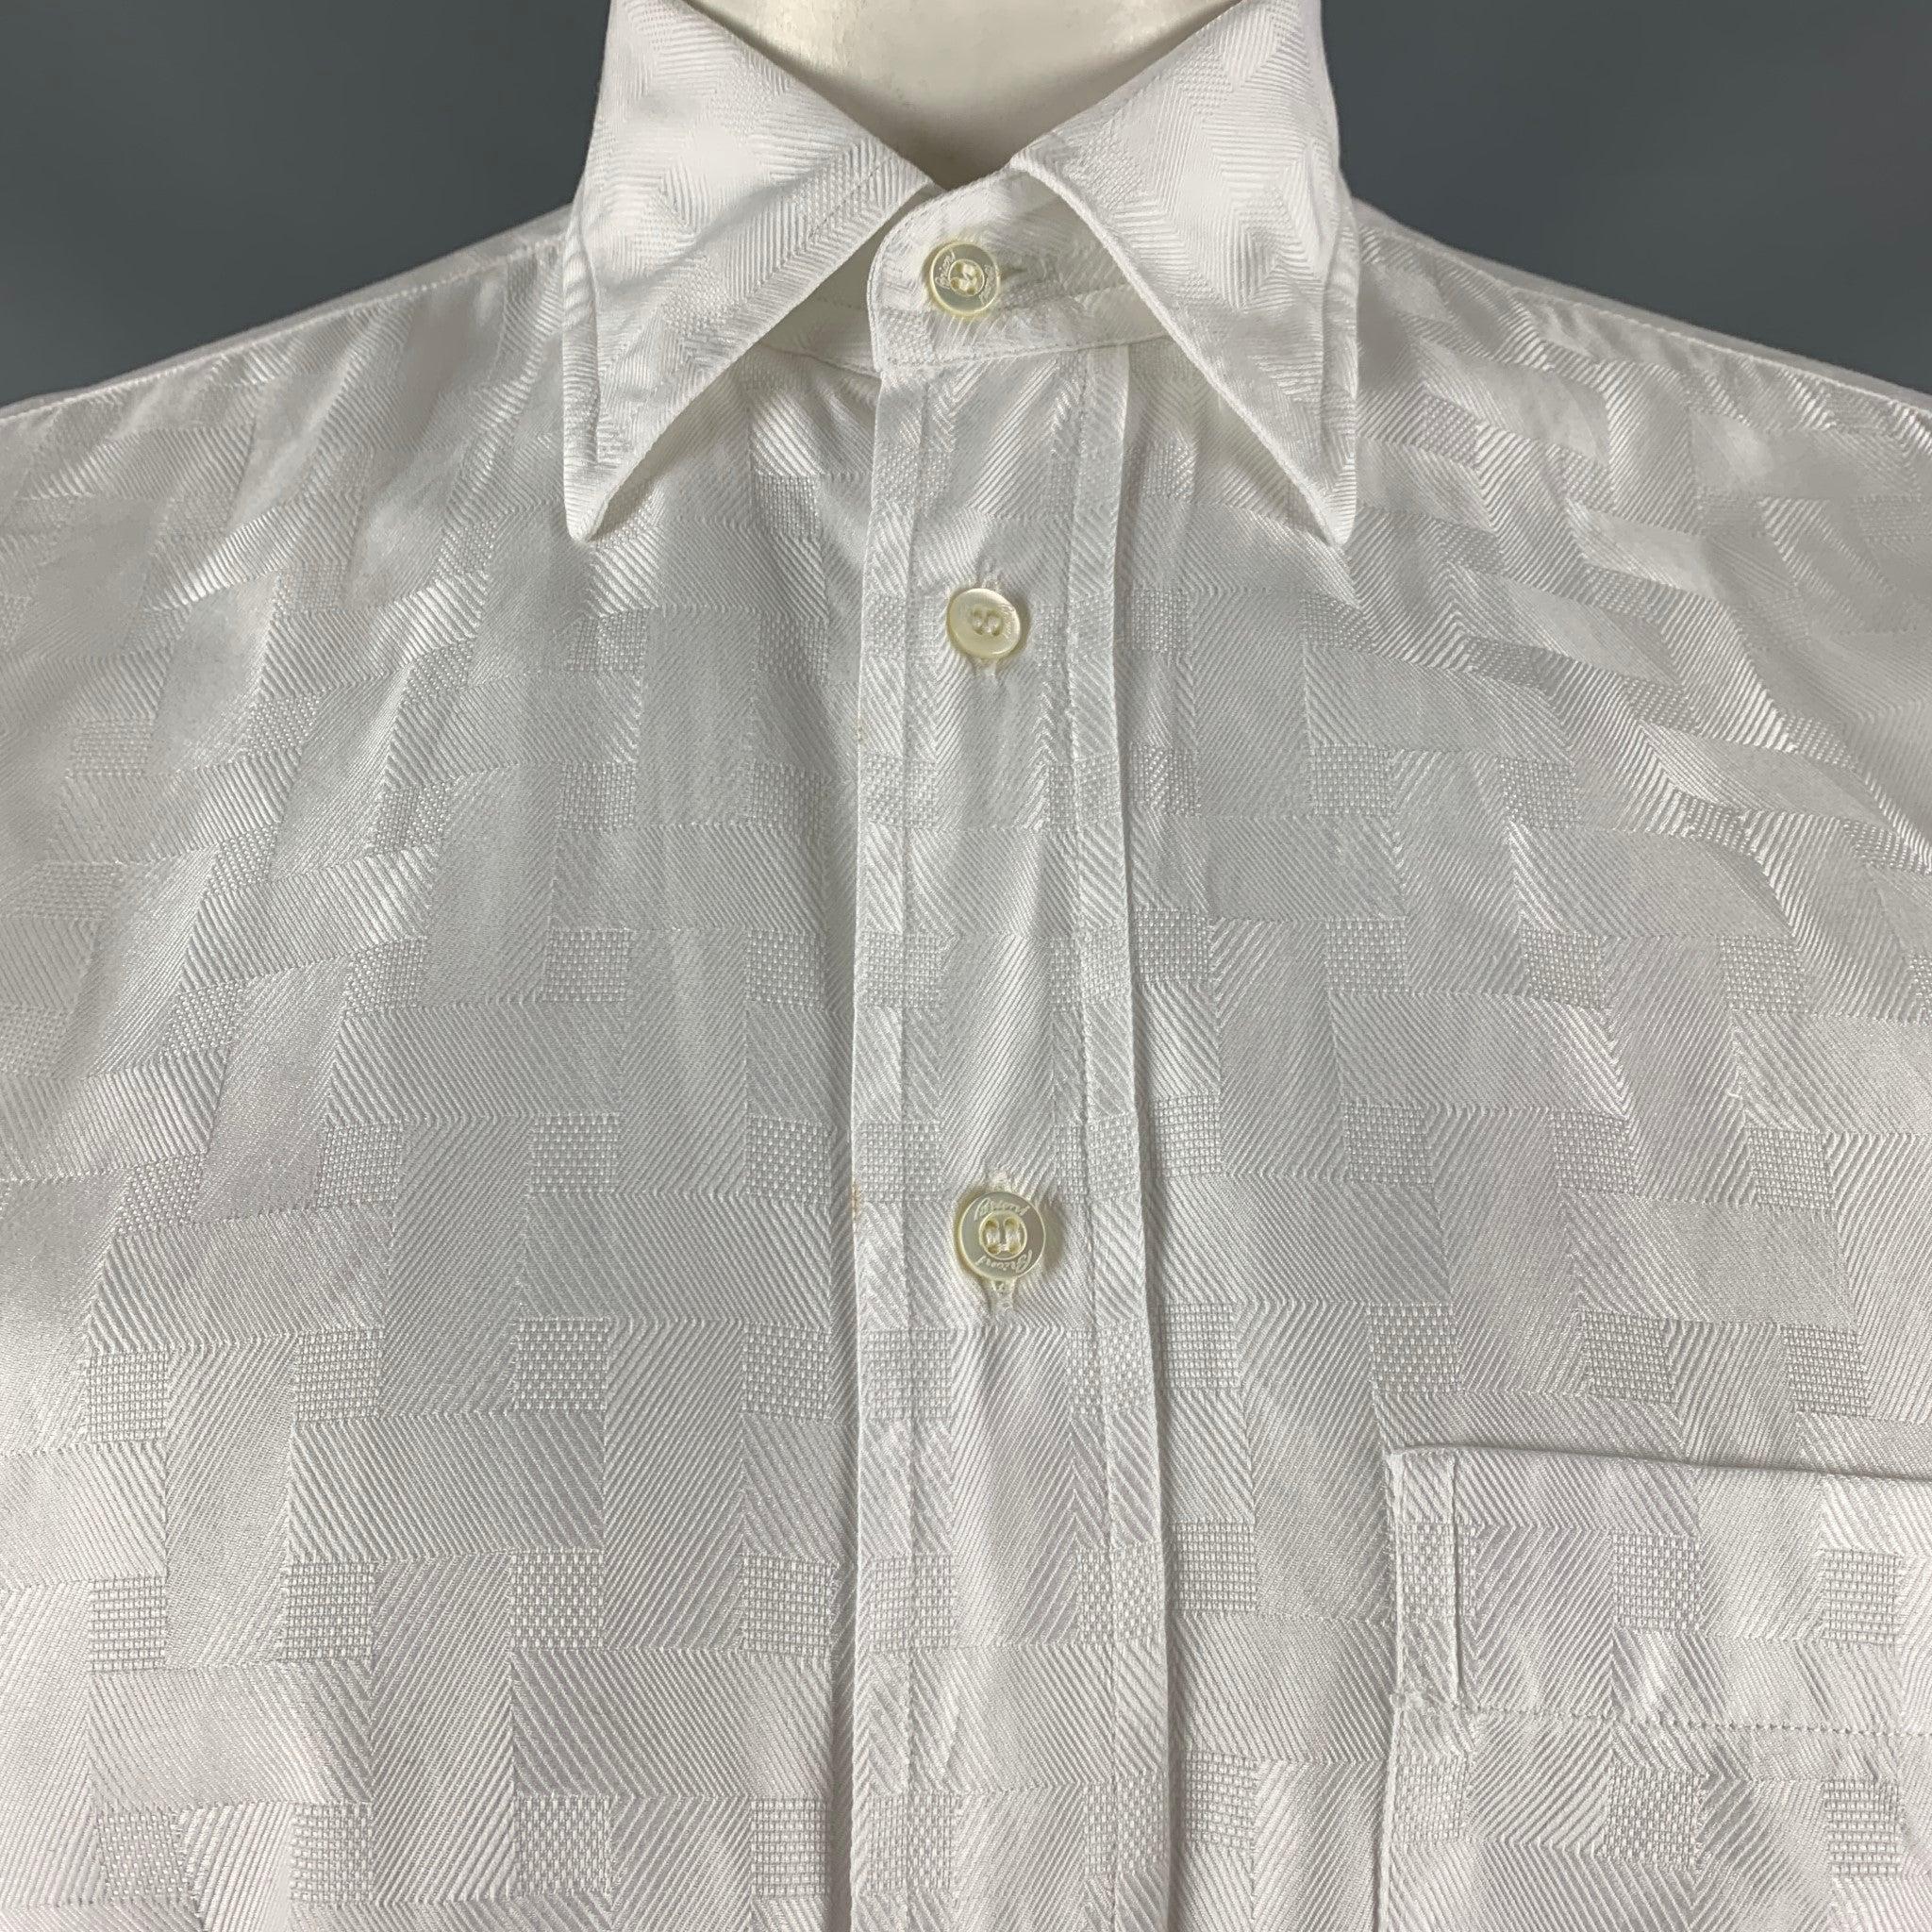 BRIONI long sleeve shirt comes in a white cotton jacquard featuring a button down collar, patch pocket, and a button down closure. Made in Italy.Very Good Pre-Owned Condition.  

Marked:   M 

Measurements: 
 
Shoulder: 19 inches Chest: 47 inches